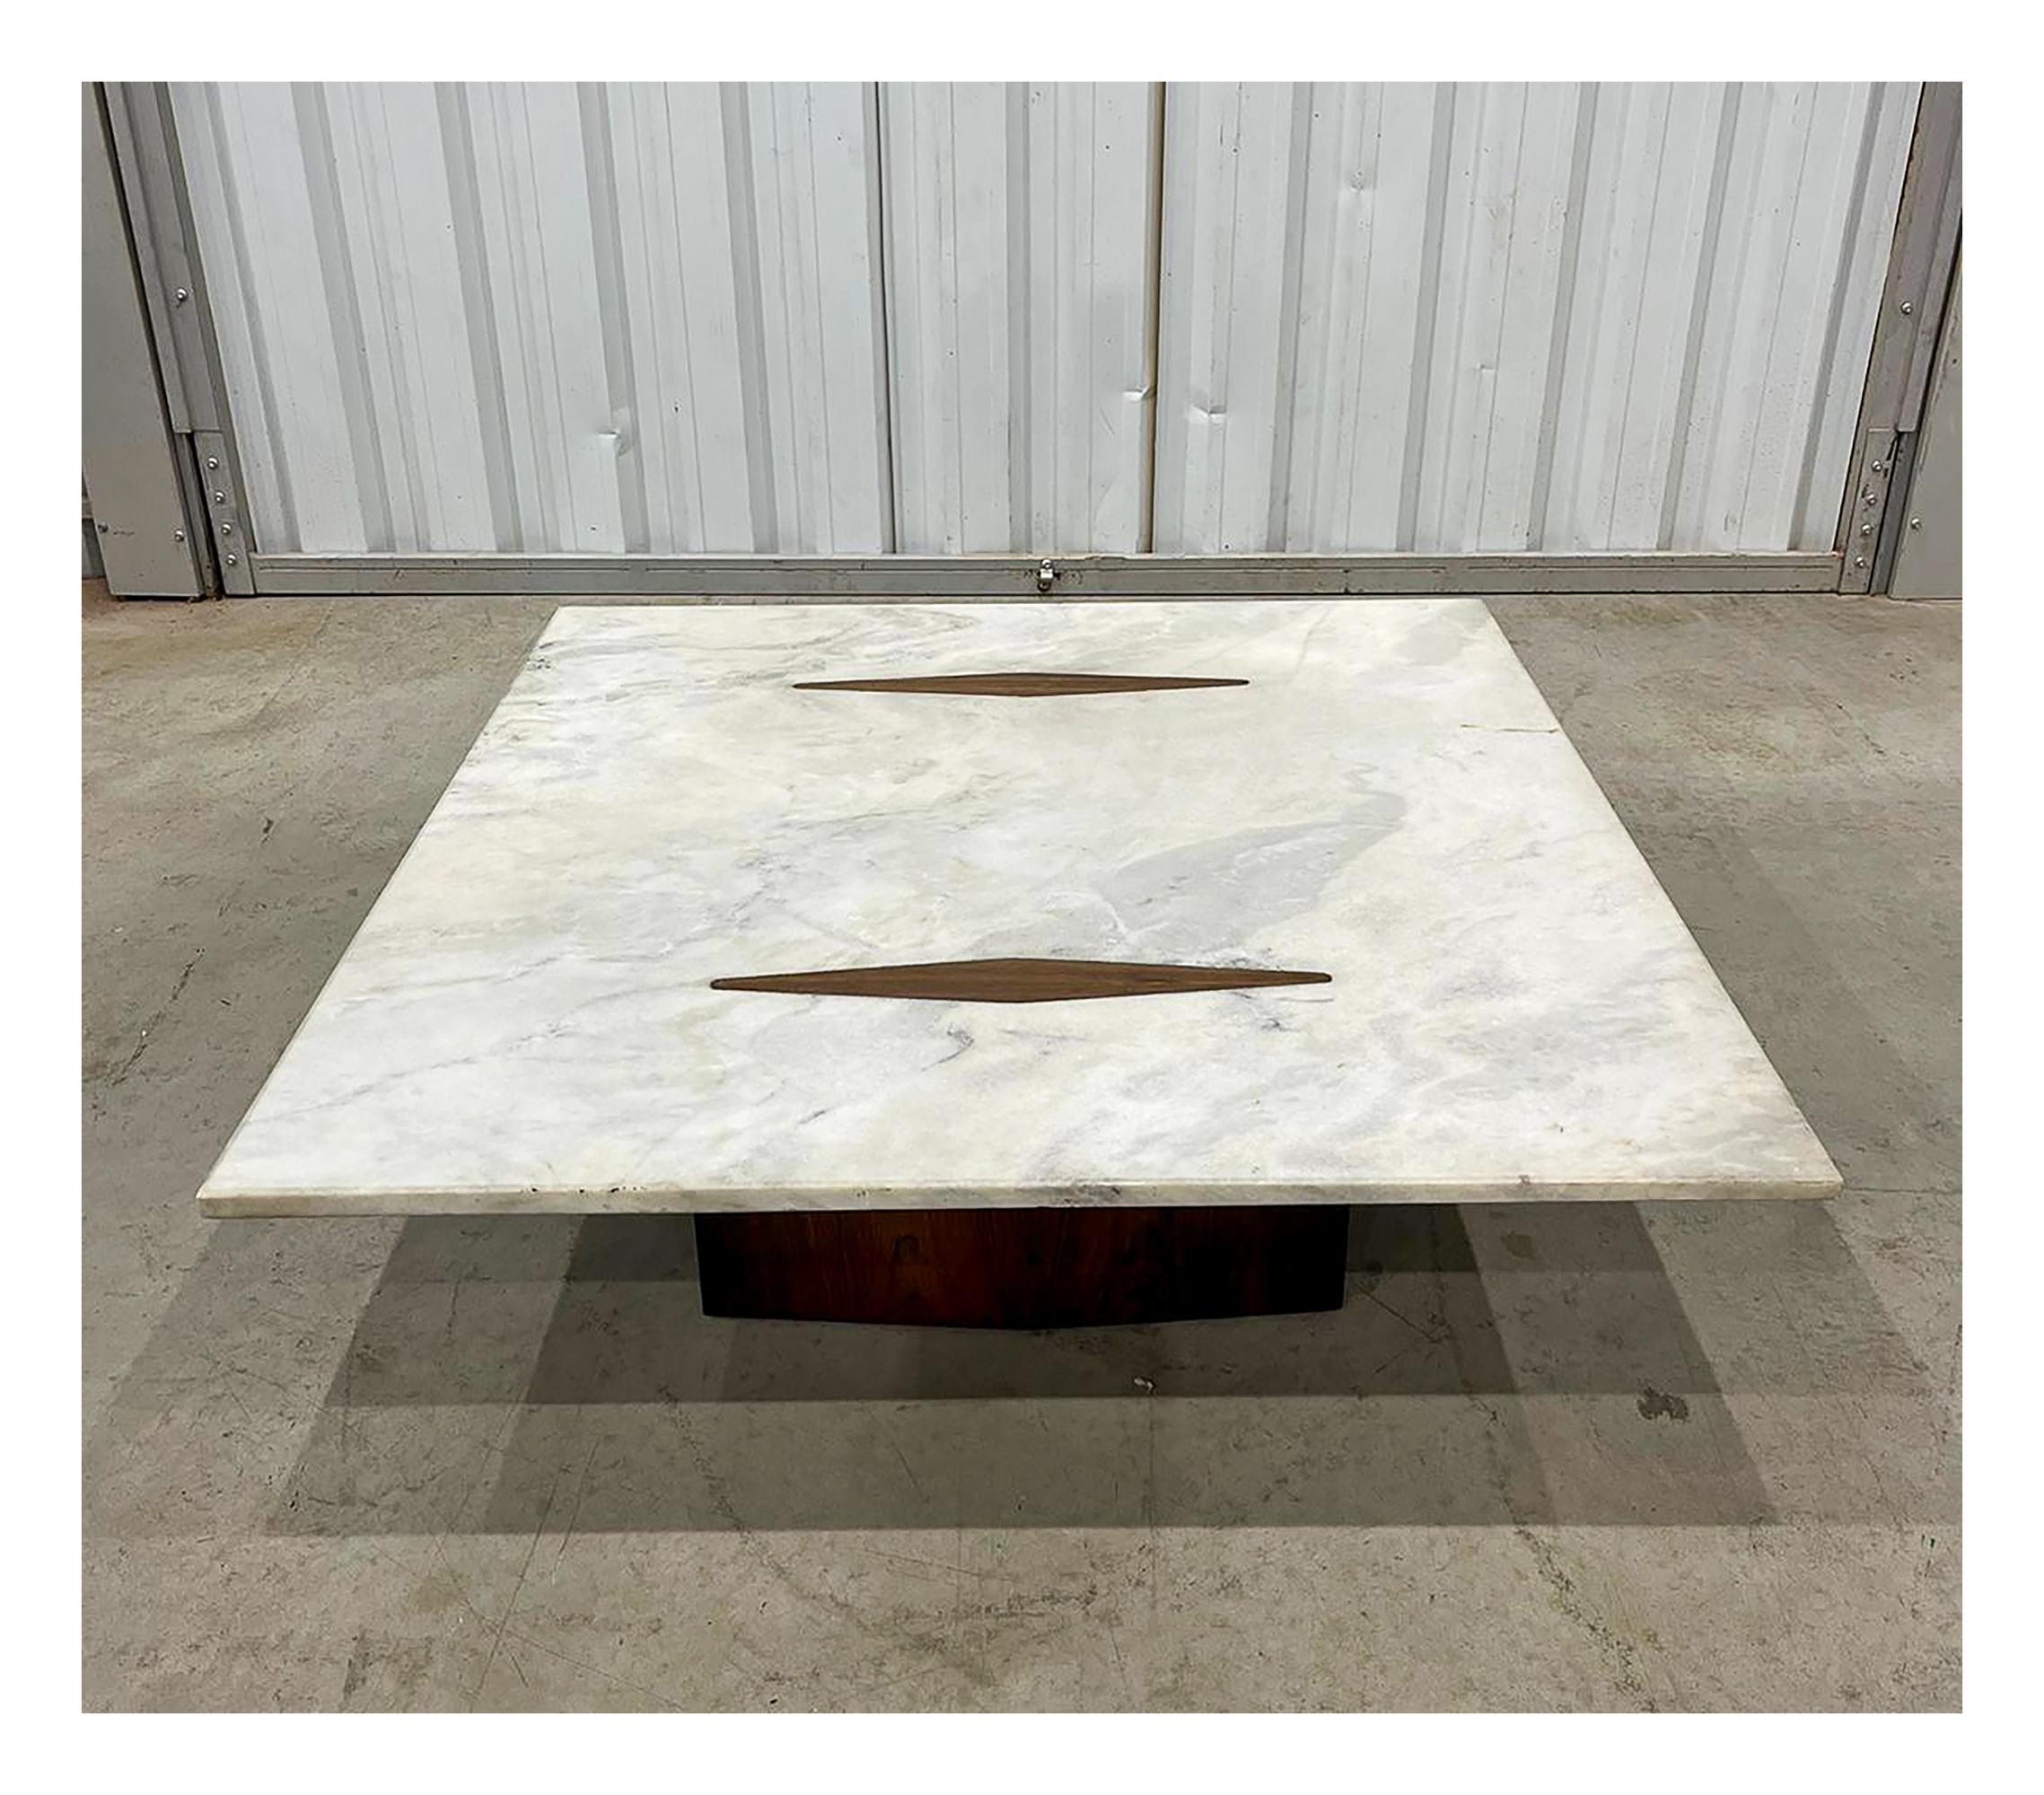 20th Century Mid-Century Modern Coffee Table in Wood & Marble by Jorge Zalszupin, Brazil For Sale